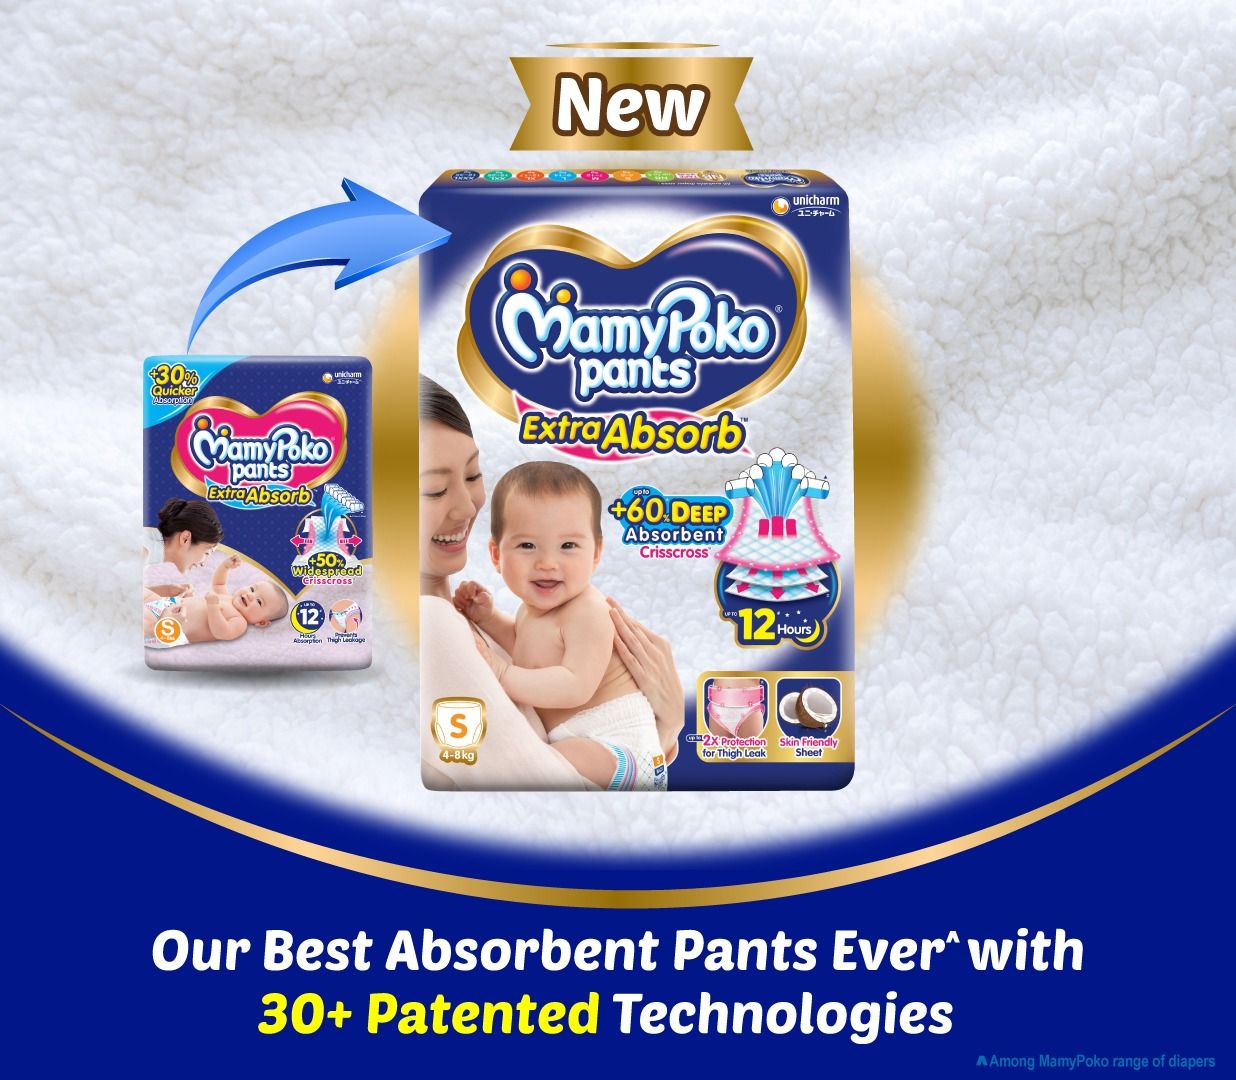 White Crisscross Absorbent Sheet Extra Absorb Mamypoko Diaper Pants Upto 10  Hours ,s at Best Price in Ghaziabad | Unicharm